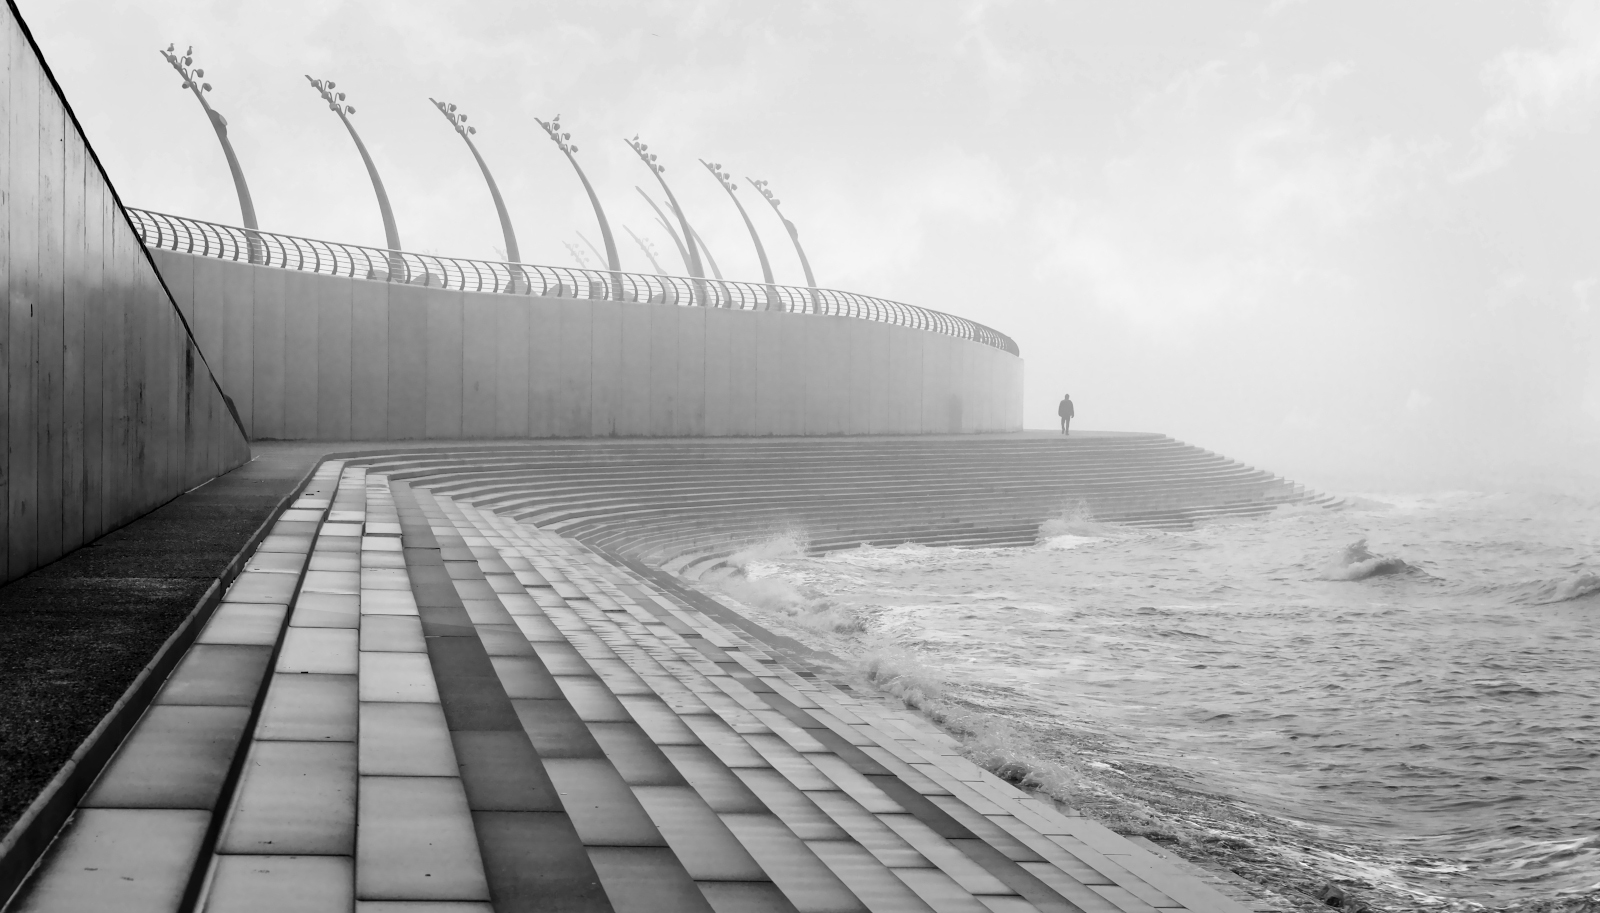 First Place - A Grey Day In Blackpool By Chris Round